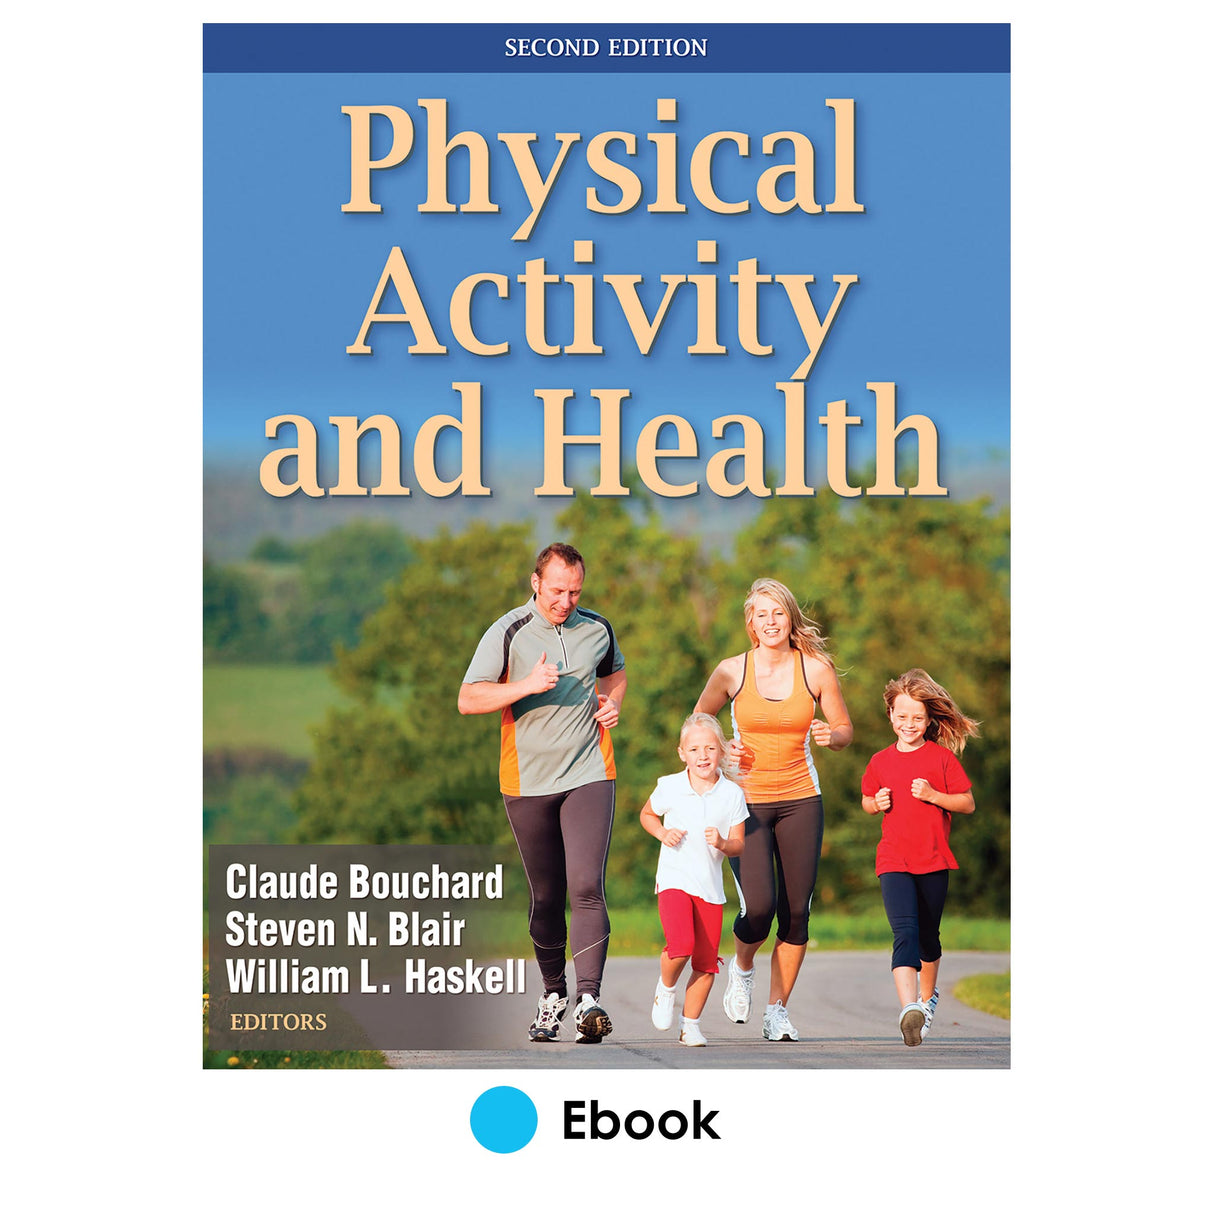 Physical Activity and Health 2nd Edition PDF